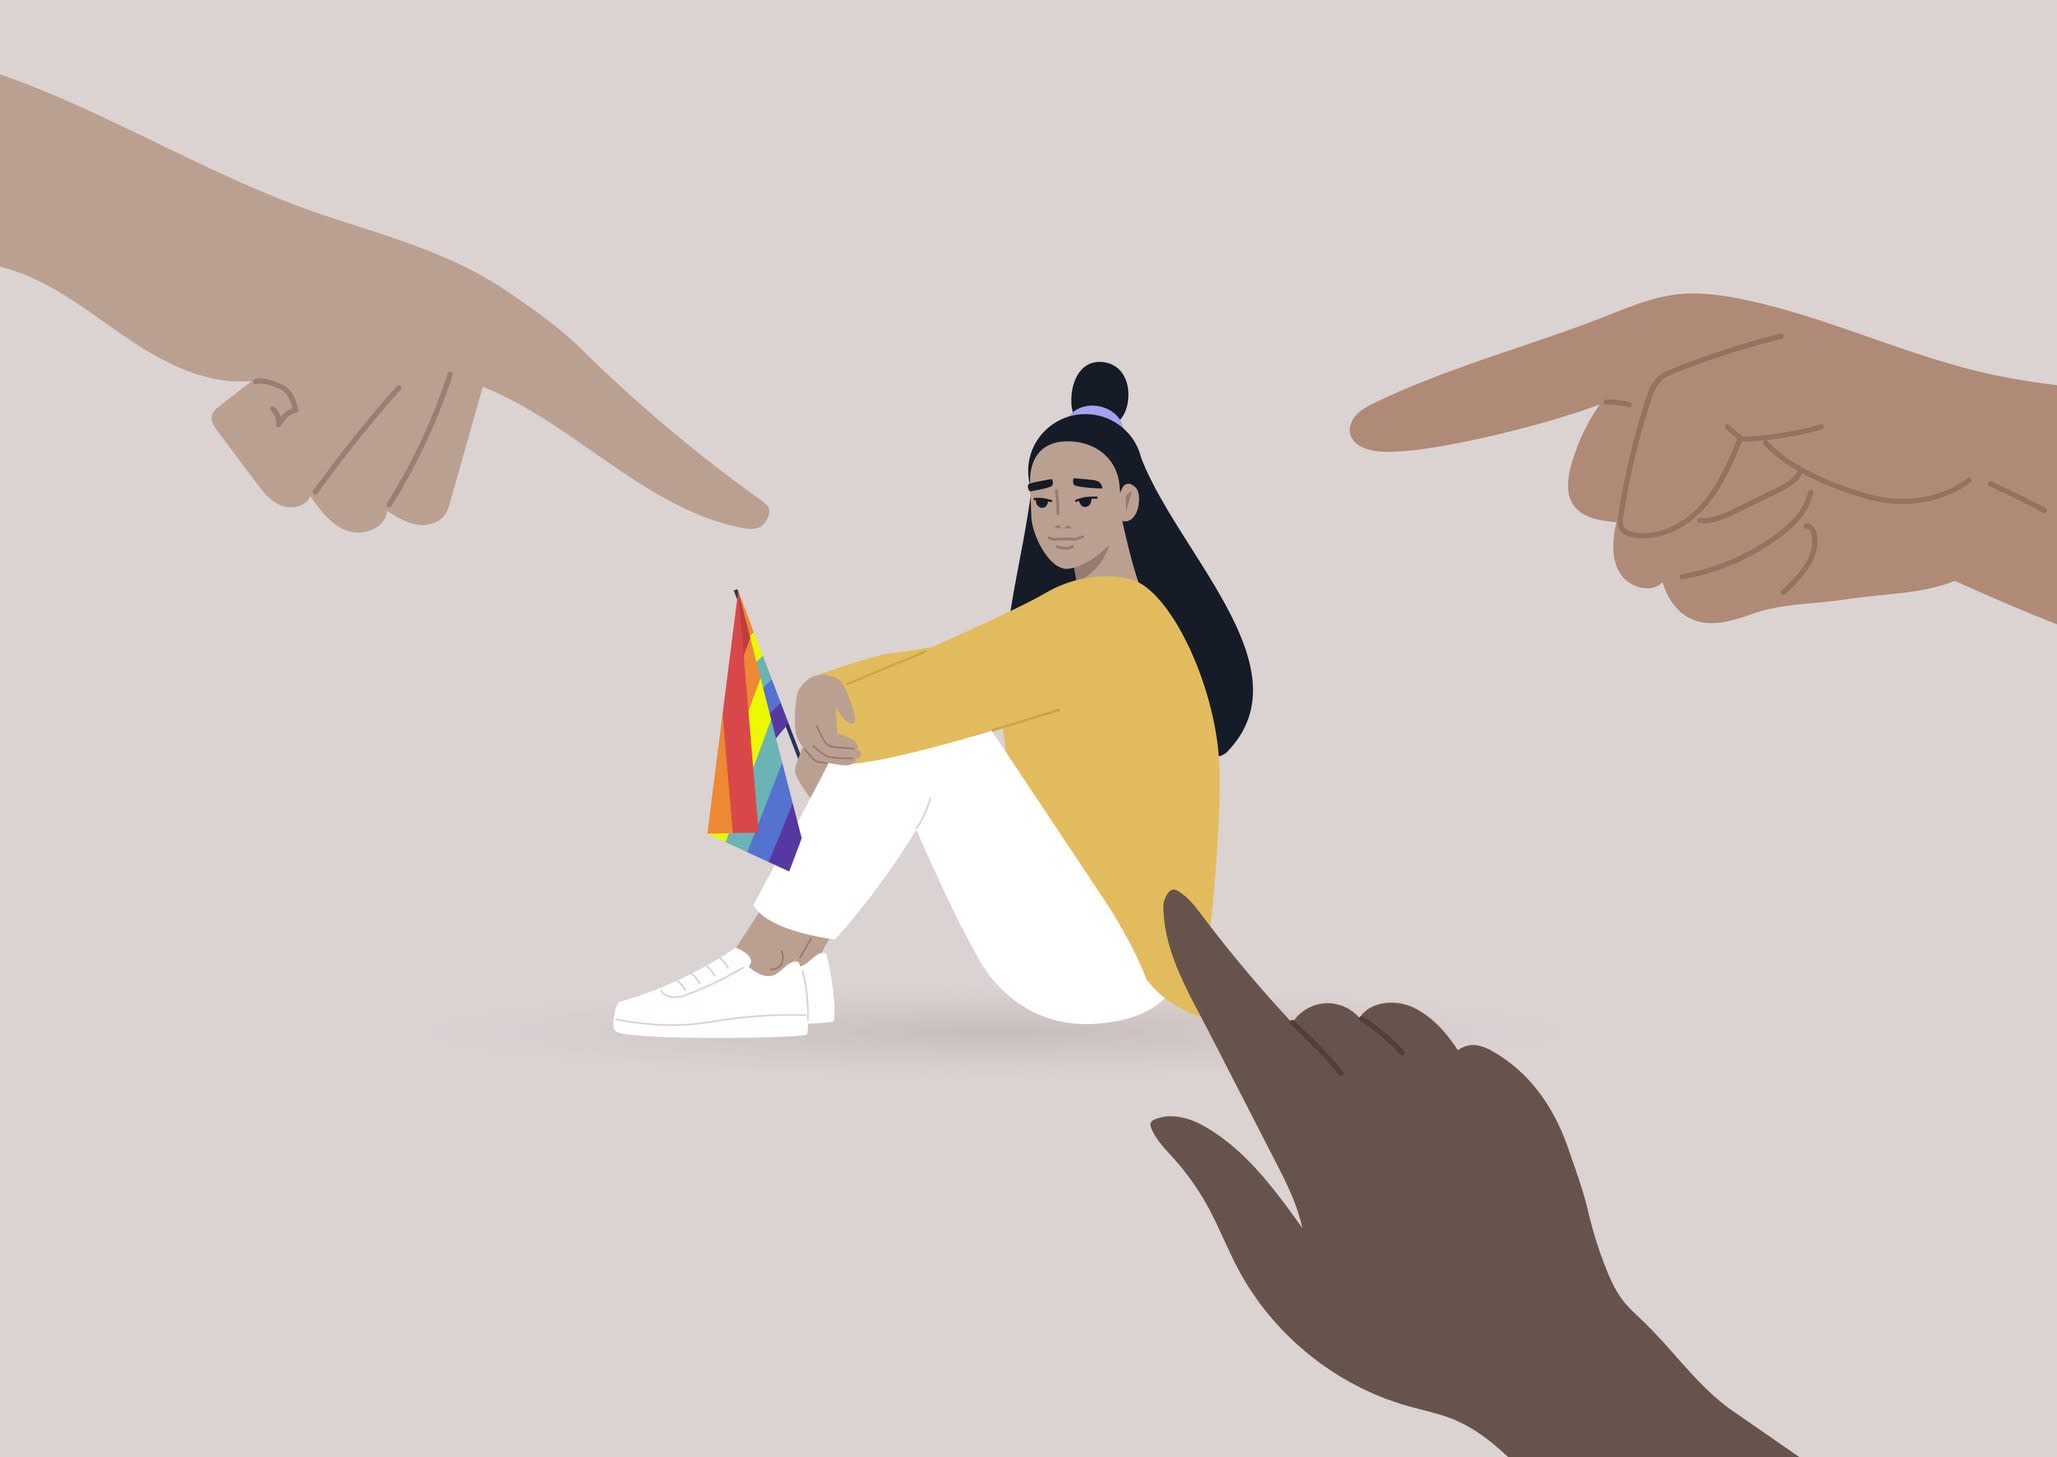 Fingers pointing at an lgbtq person